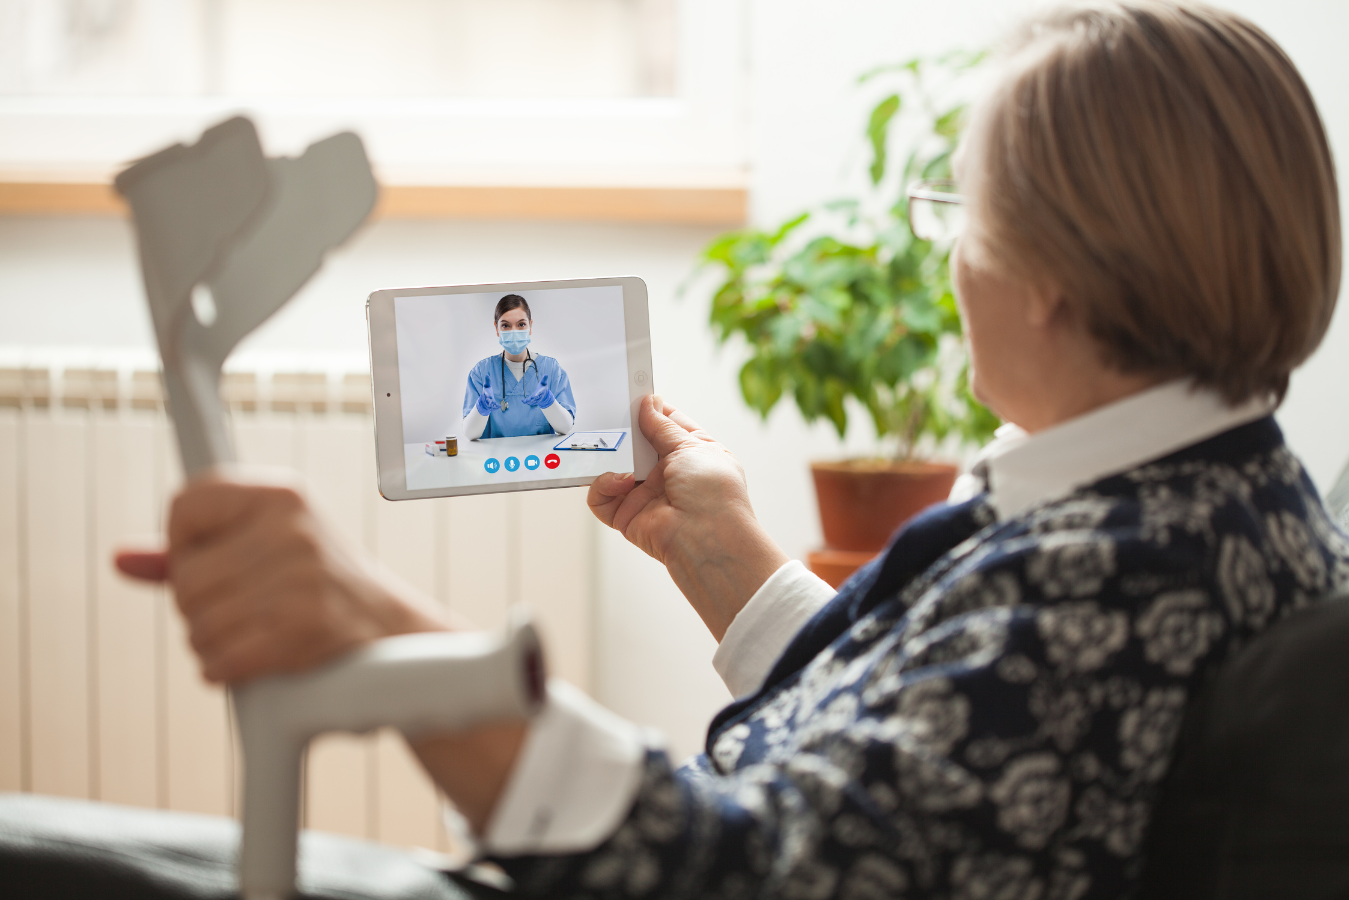 An elderly lady, sat down, is holding a walking crutch in one hand and holding a computer tablet in the other hand, having an online appointment with her GP.